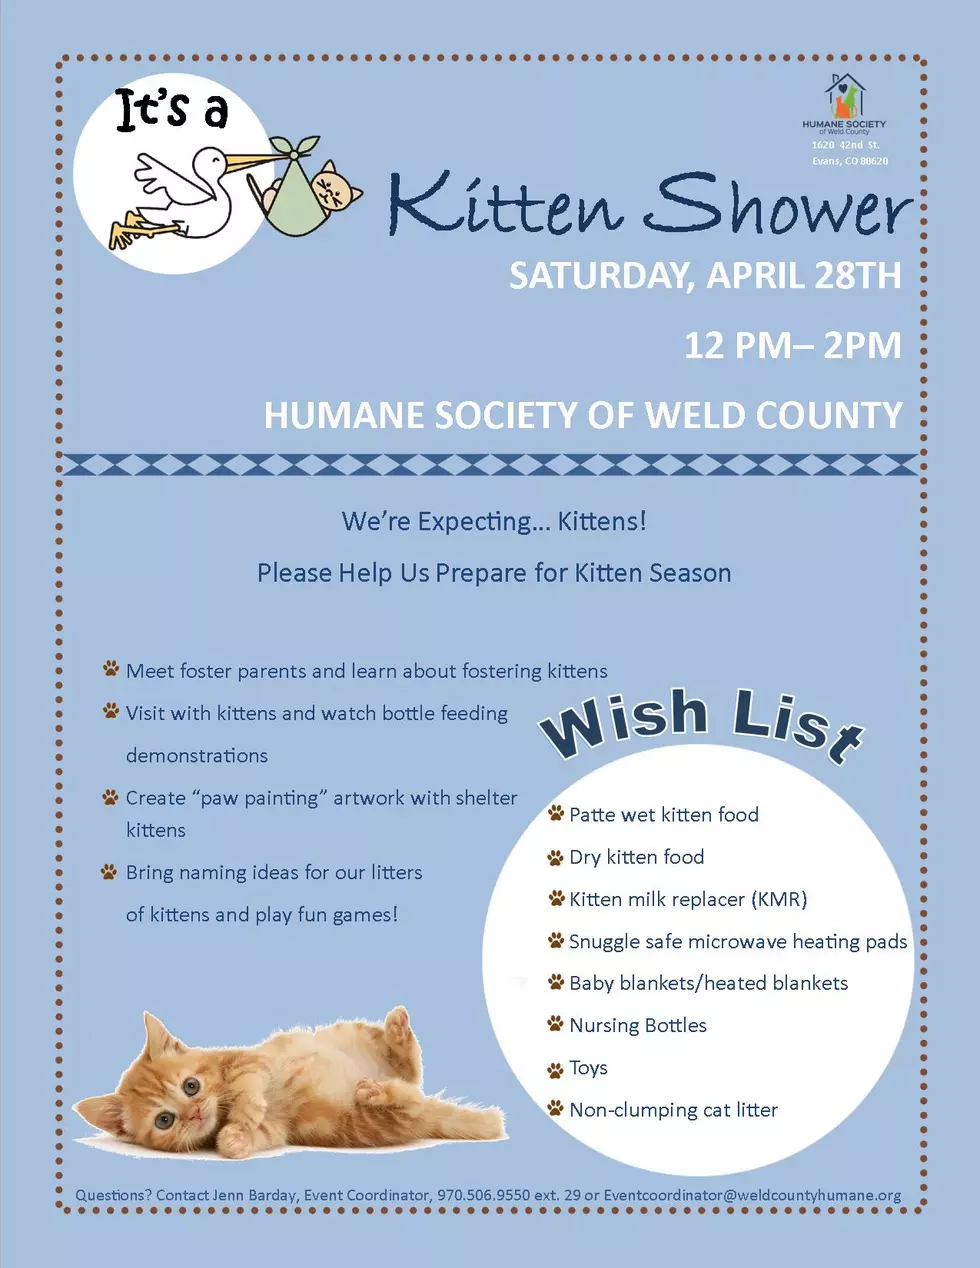 Kitten Shower at the Humane Society of Weld County